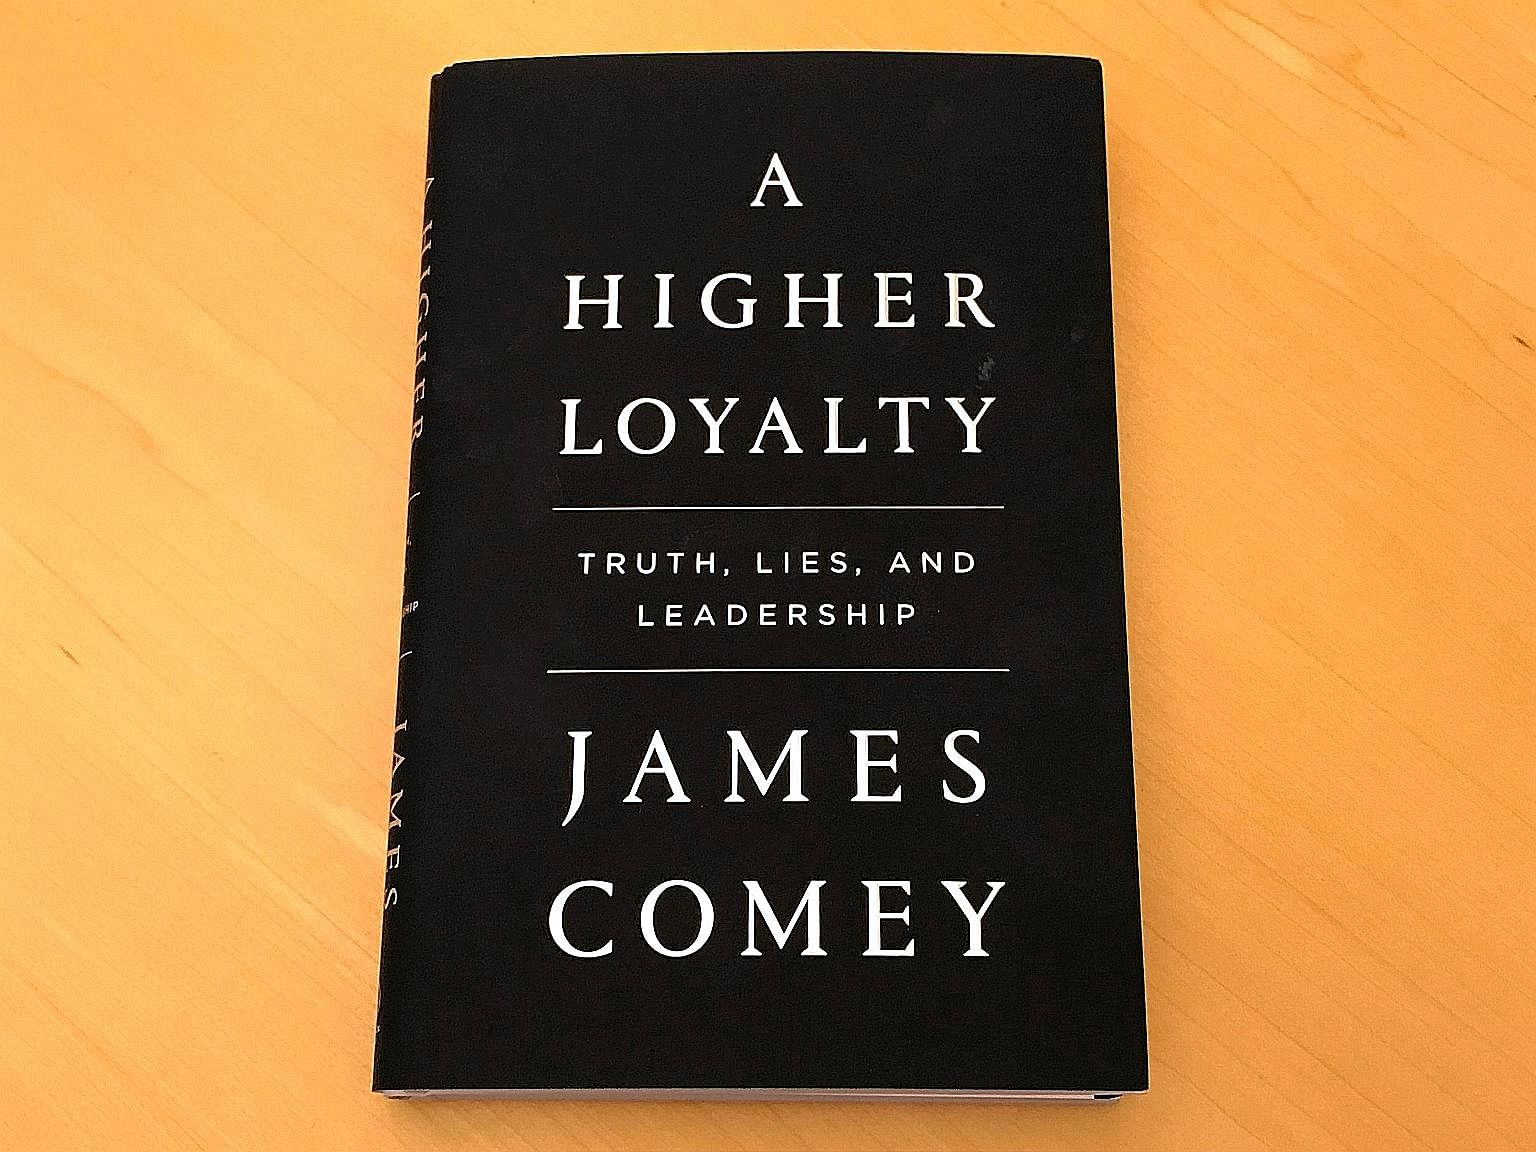 Mr James Comey, who is on a publicity tour for his book, says President Donald Trump "does not reflect the values of this country".